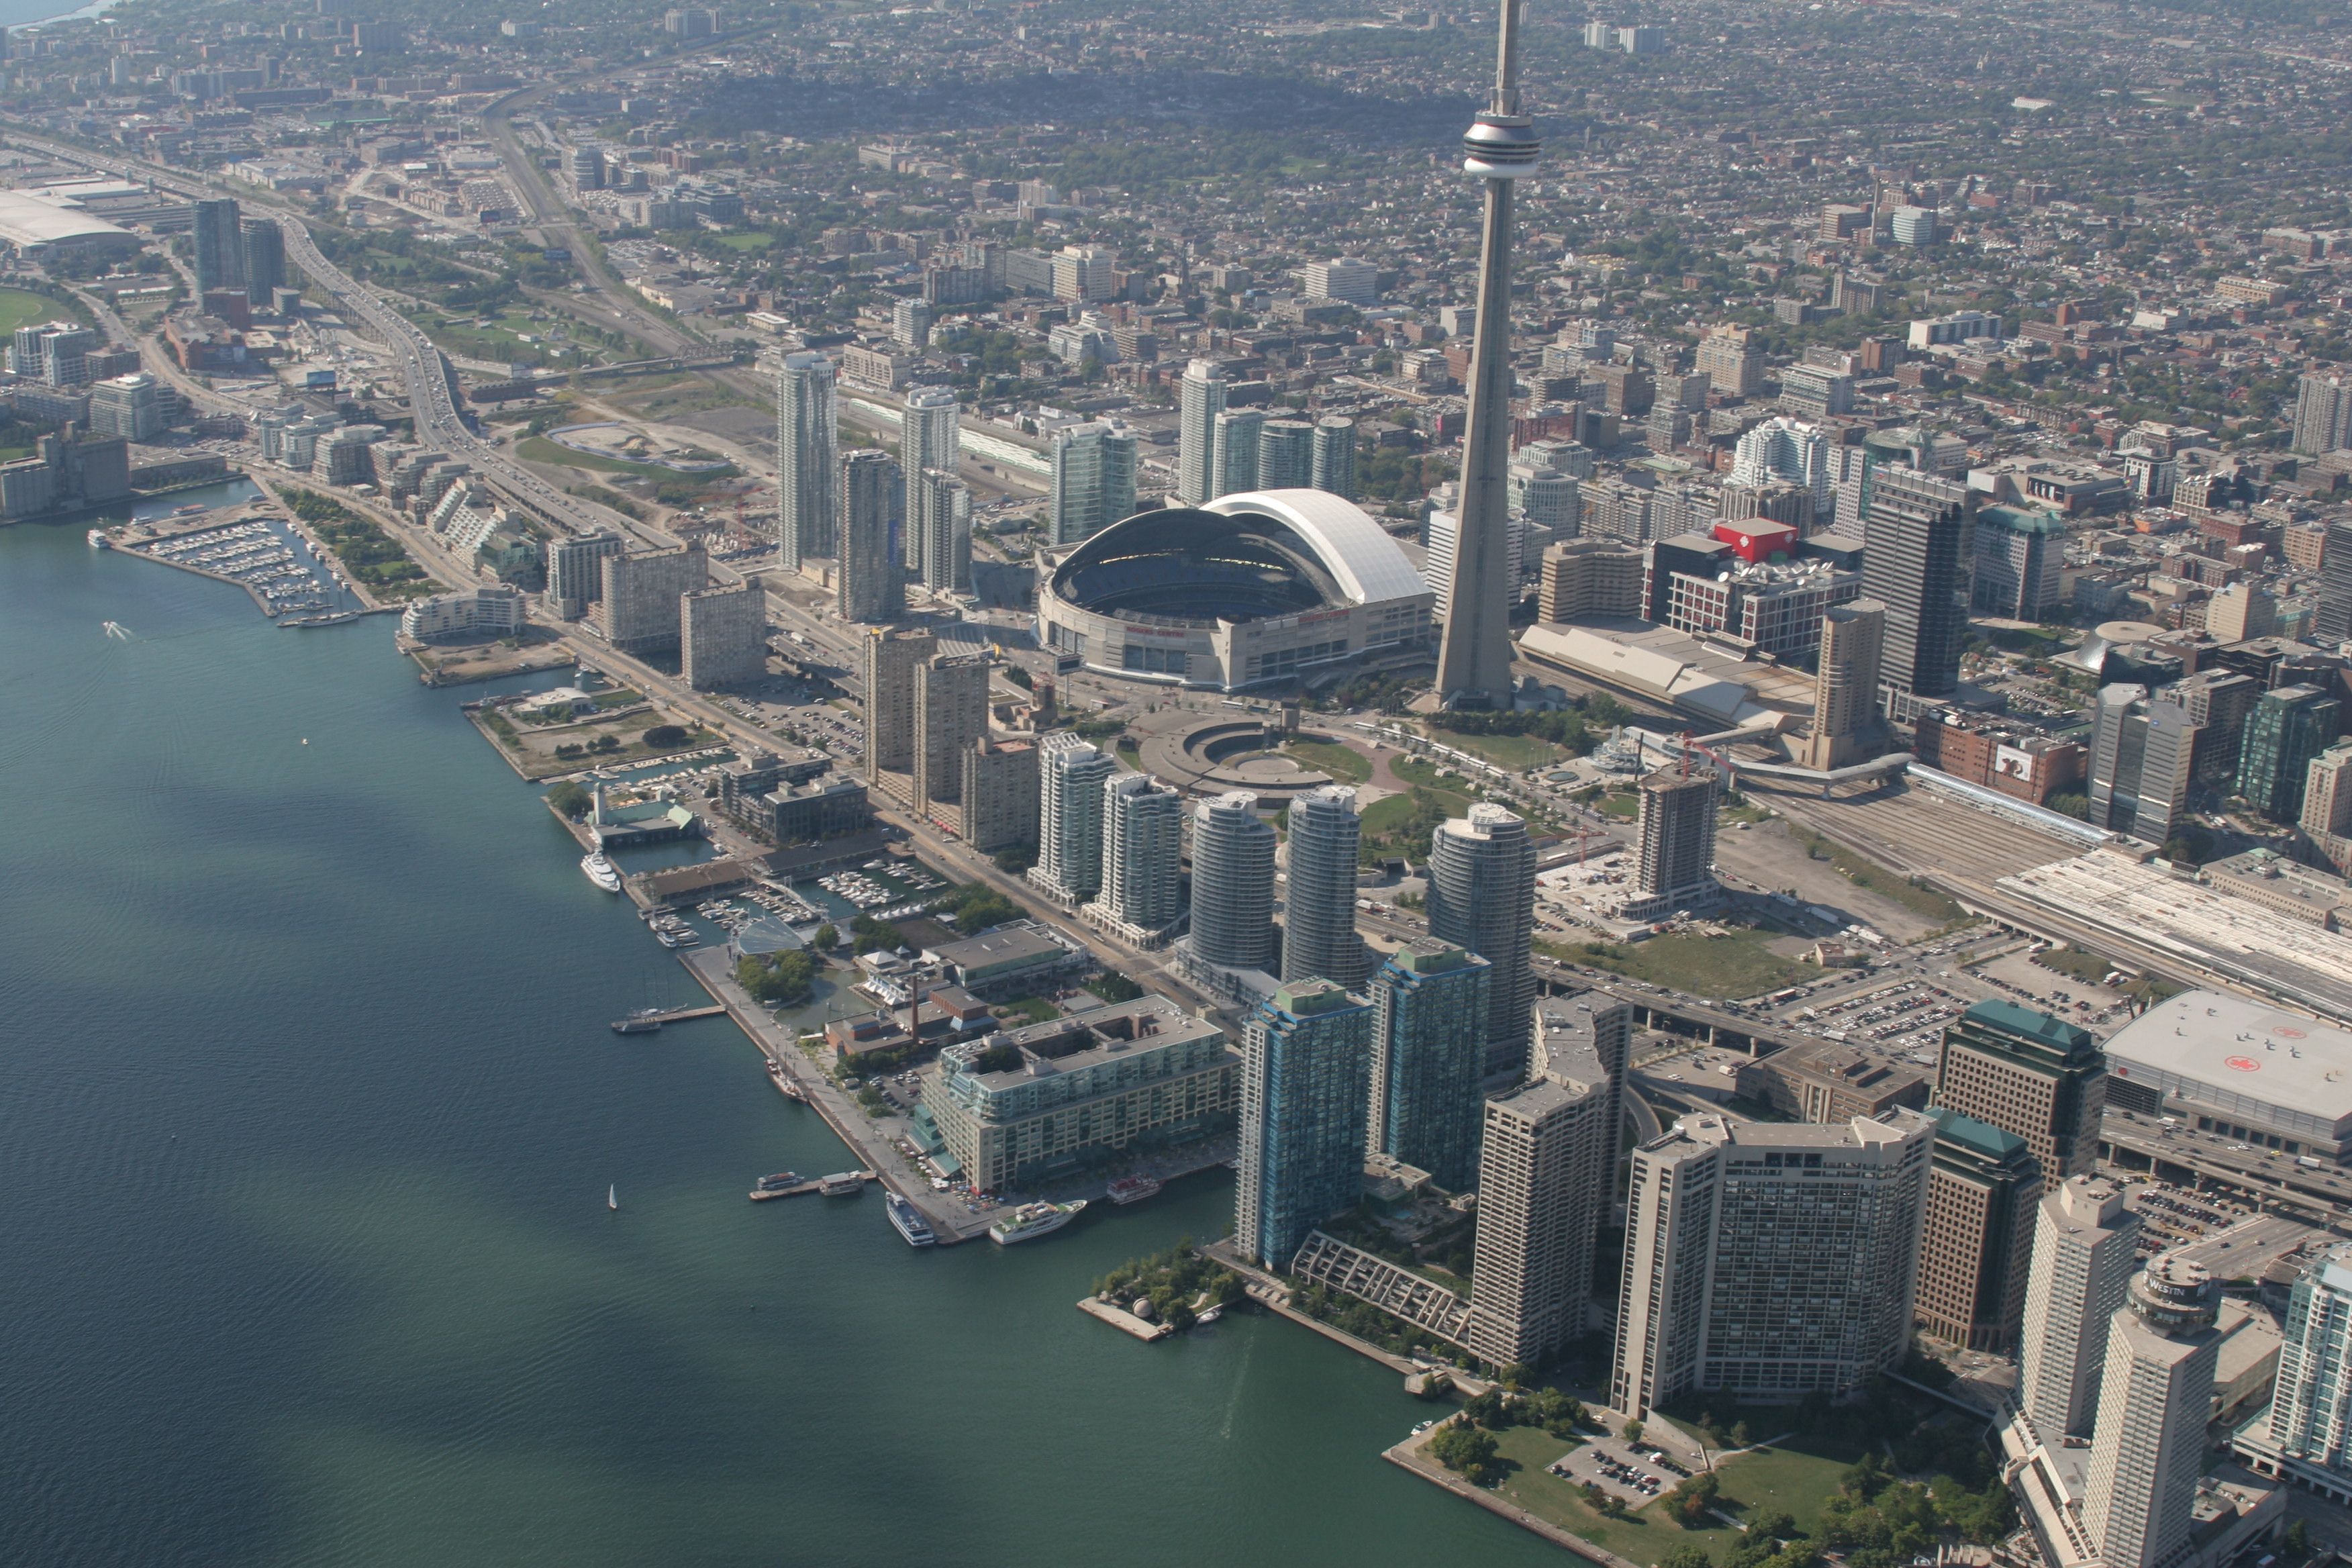 An aerial photo of Toronto's waterfront taken in the early 2000s